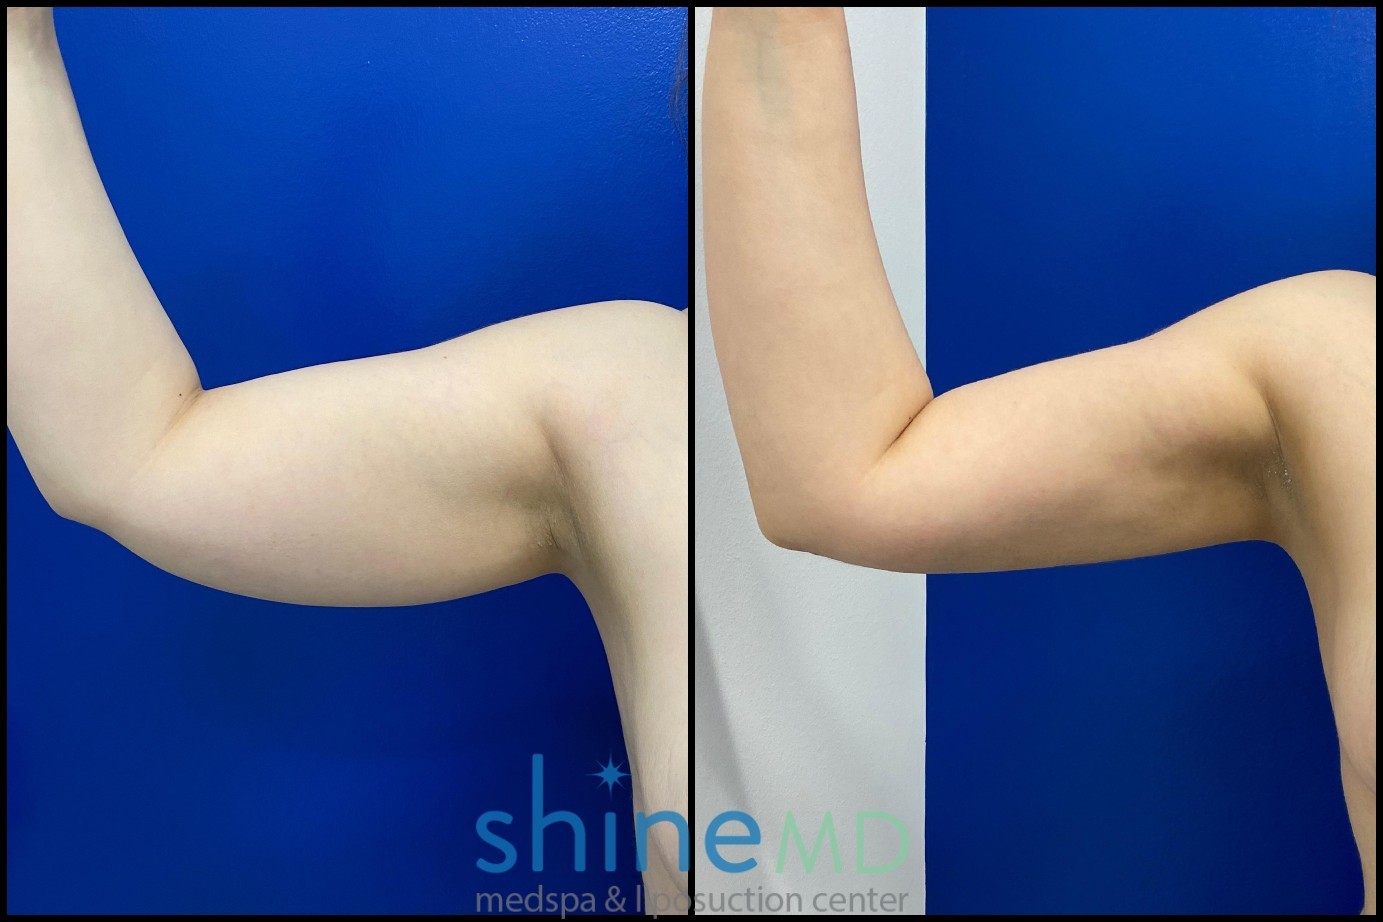 Arm Contouring Surgery before and after photos